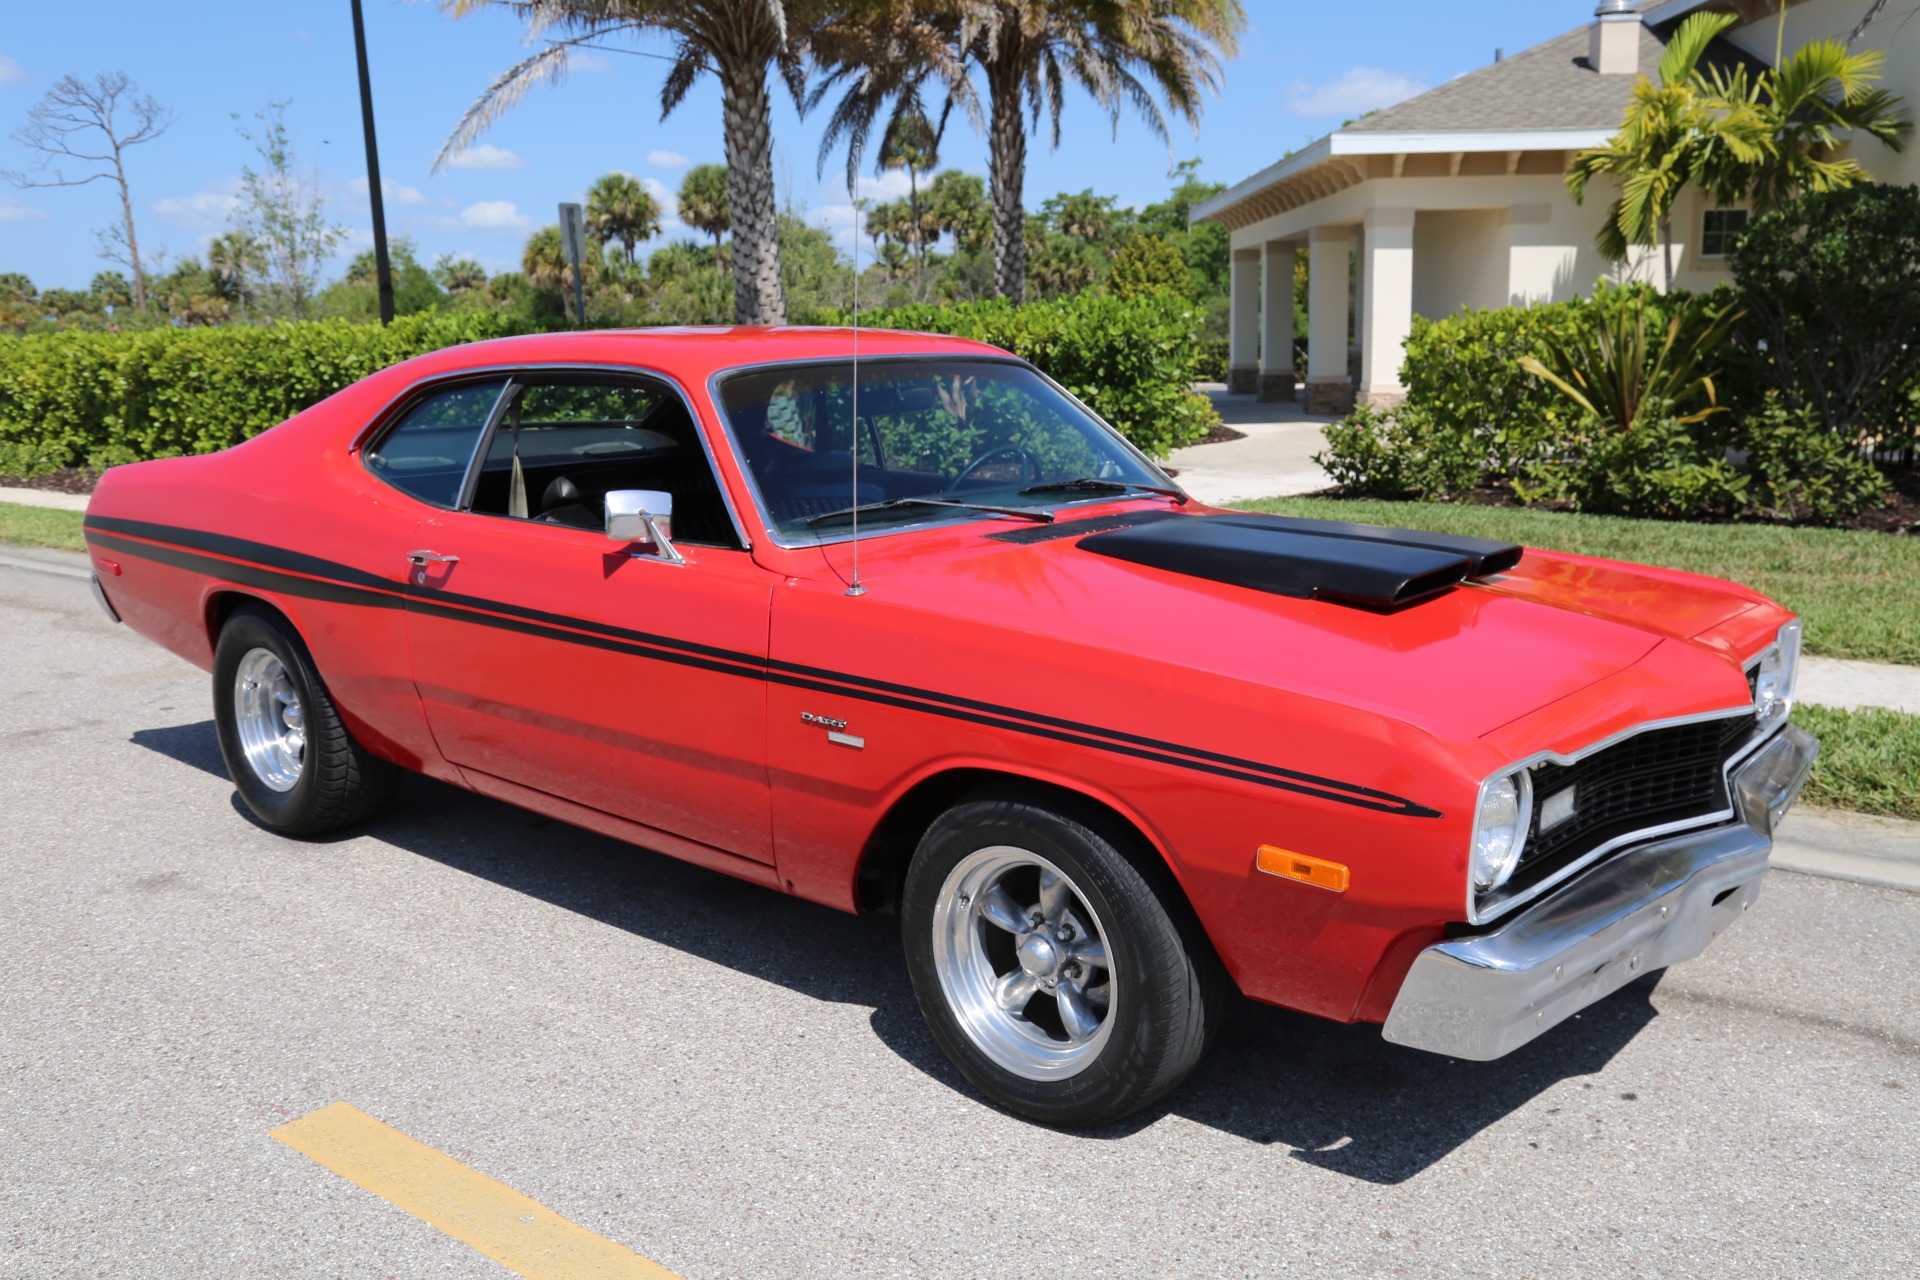 Used 1973 Dodge Dart Dart V8 Auto for sale Sold at Muscle Cars for Sale Inc. in Fort Myers FL 33912 7